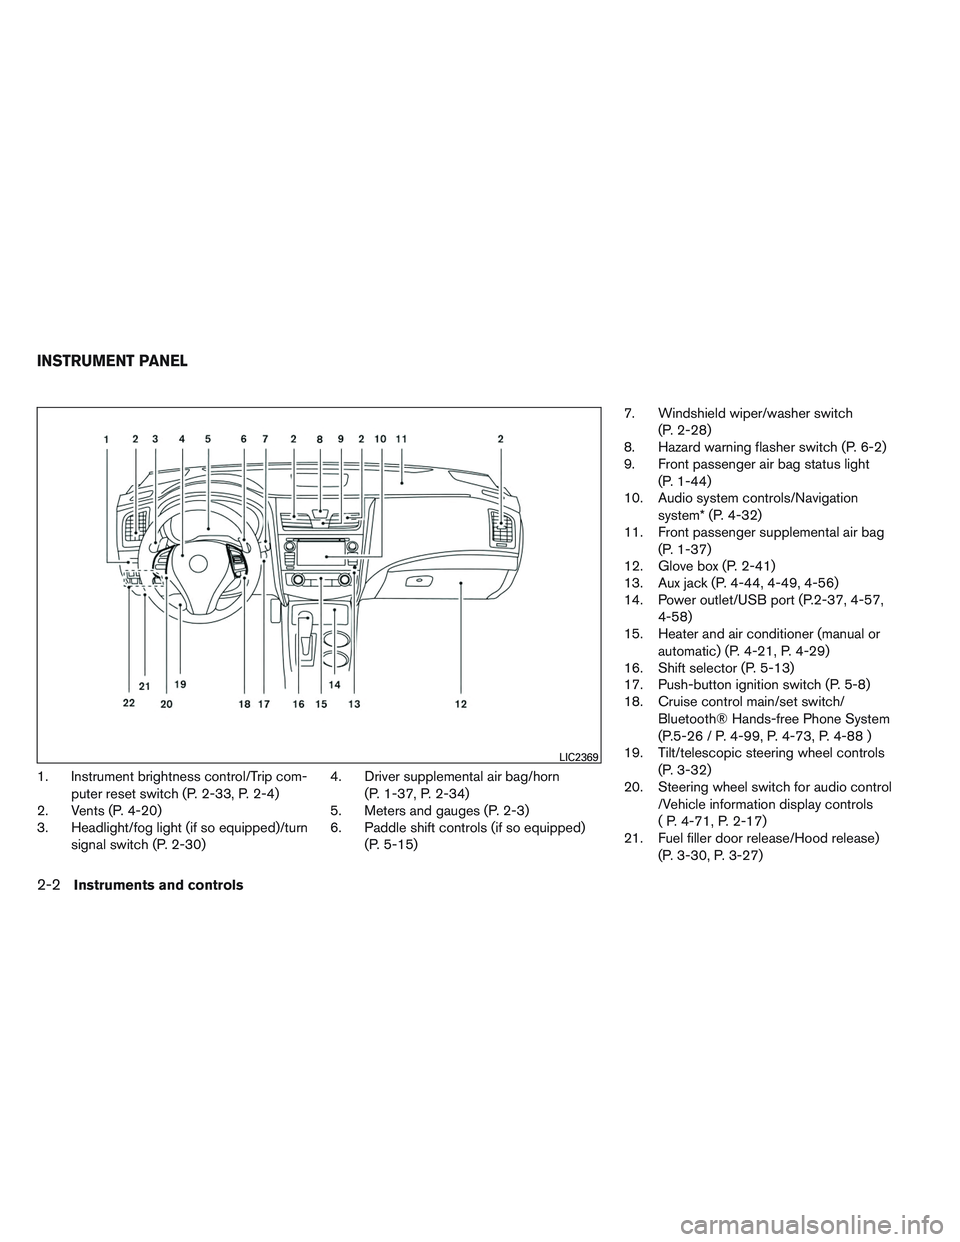 NISSAN ALTIMA SEDAN 2013  Owners Manual 1. Instrument brightness control/Trip com-puter reset switch (P. 2-33, P. 2-4)
2. Vents (P. 4-20)
3. Headlight/fog light (if so equipped)/turn
signal switch (P. 2-30) 4. Driver supplemental air bag/ho